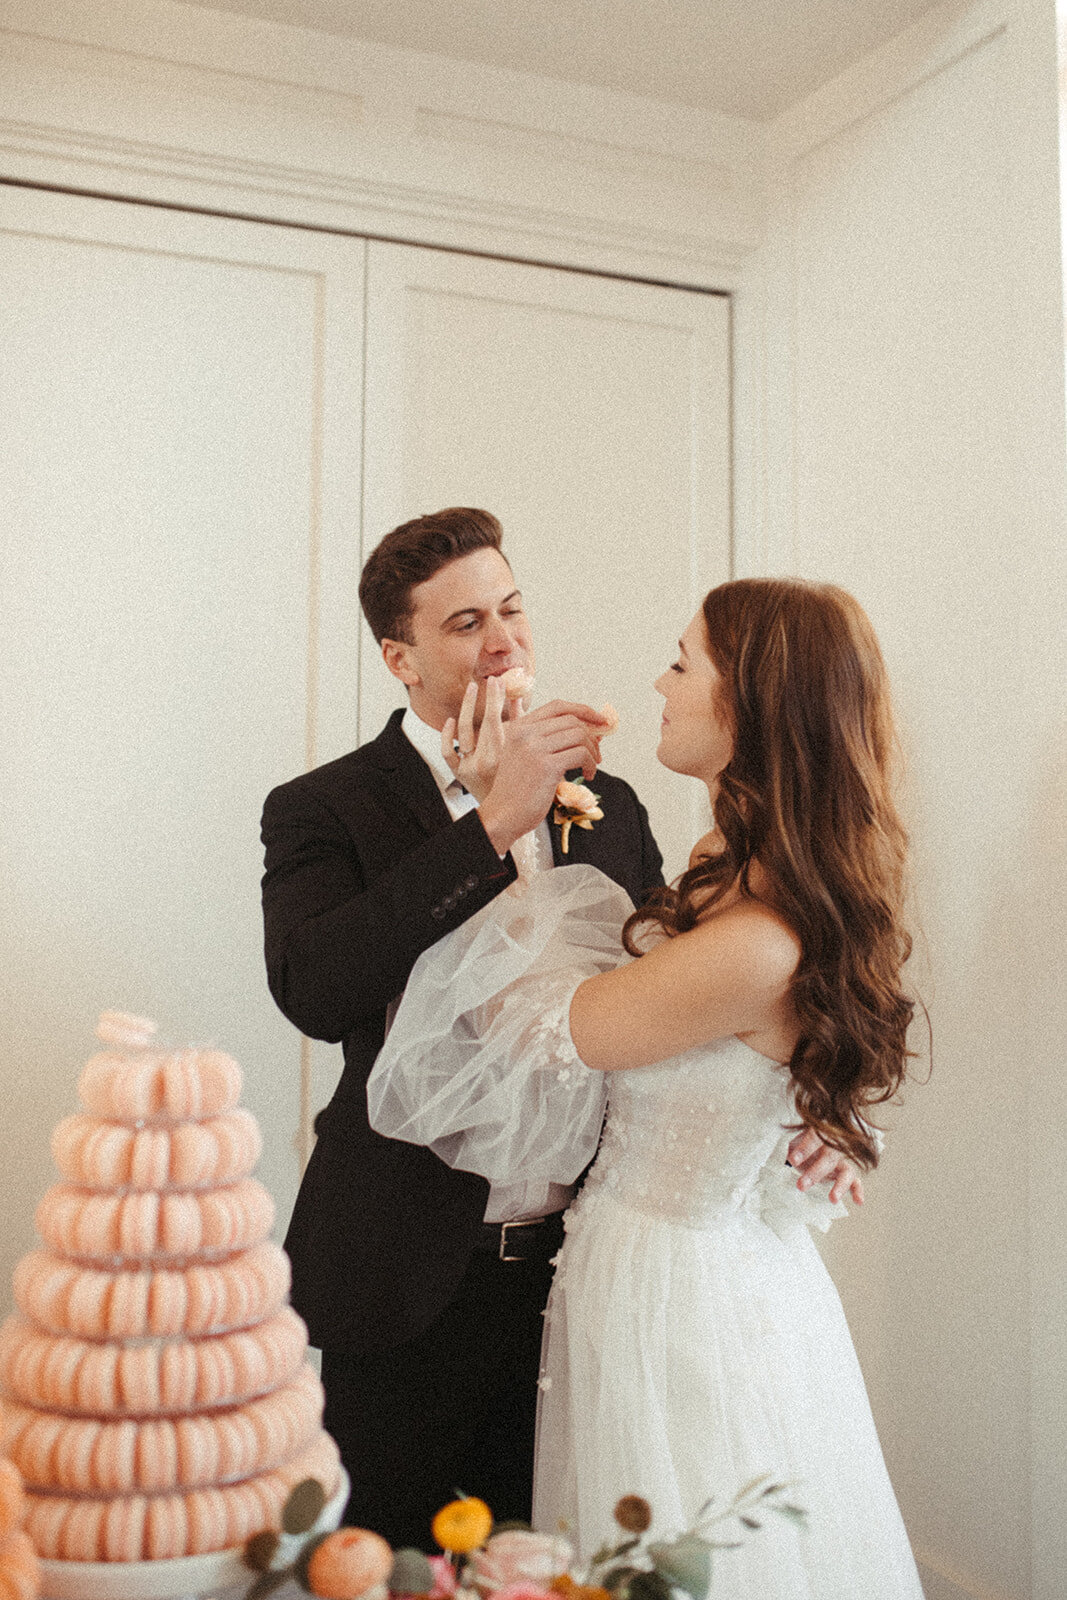 A bride and groom wearing a white wedding gown and black tuxedo feed macaroons to each other next to the dessert table.